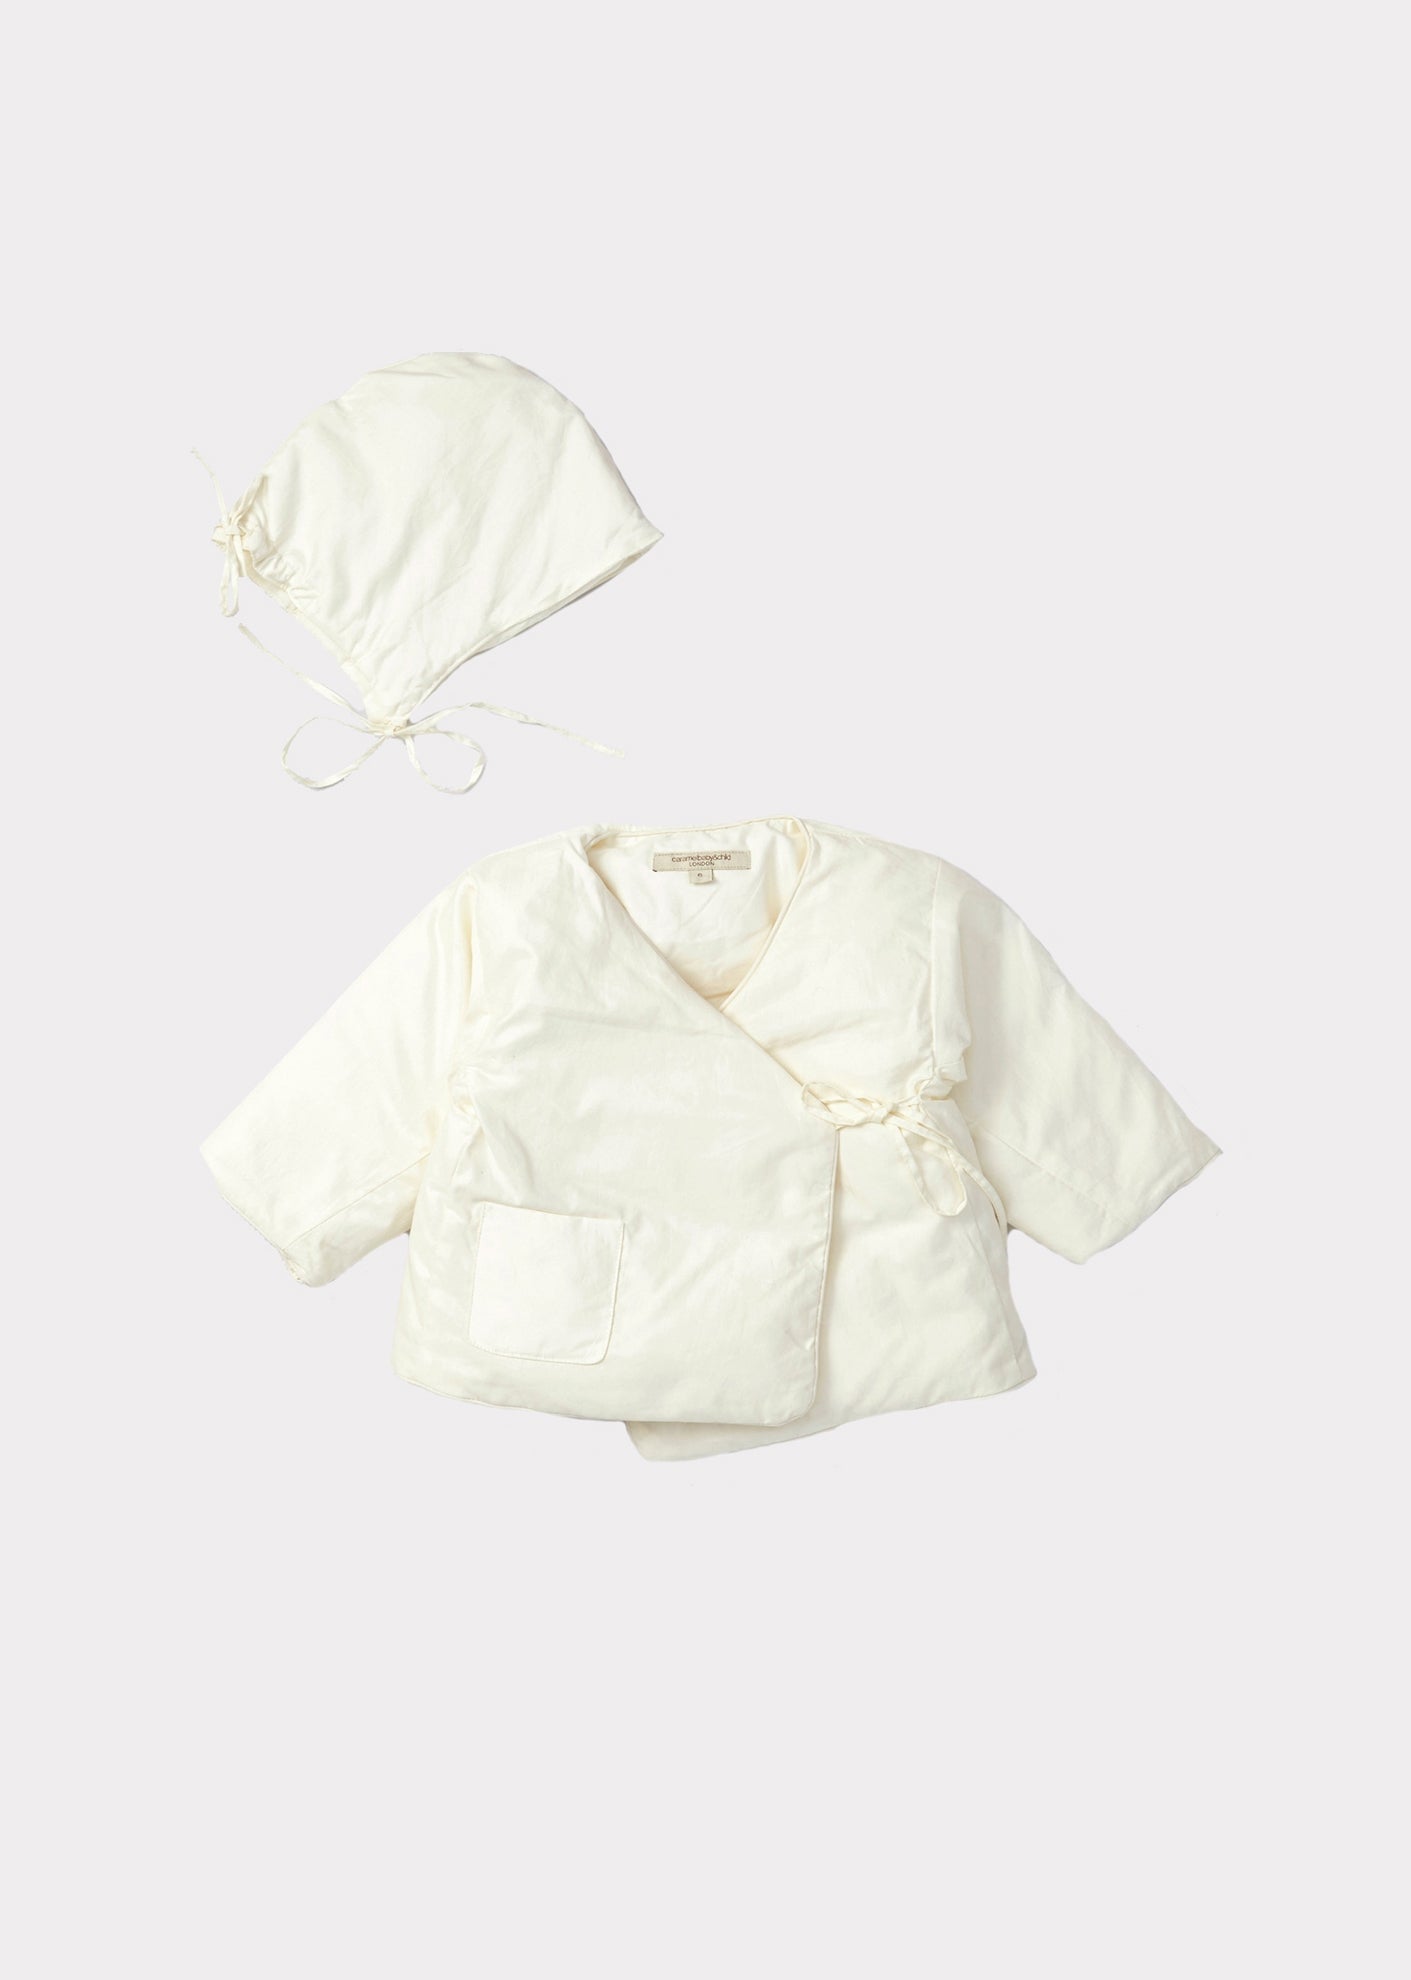 DOWN FILLED BABY JACKET AND BONNET - CREAM